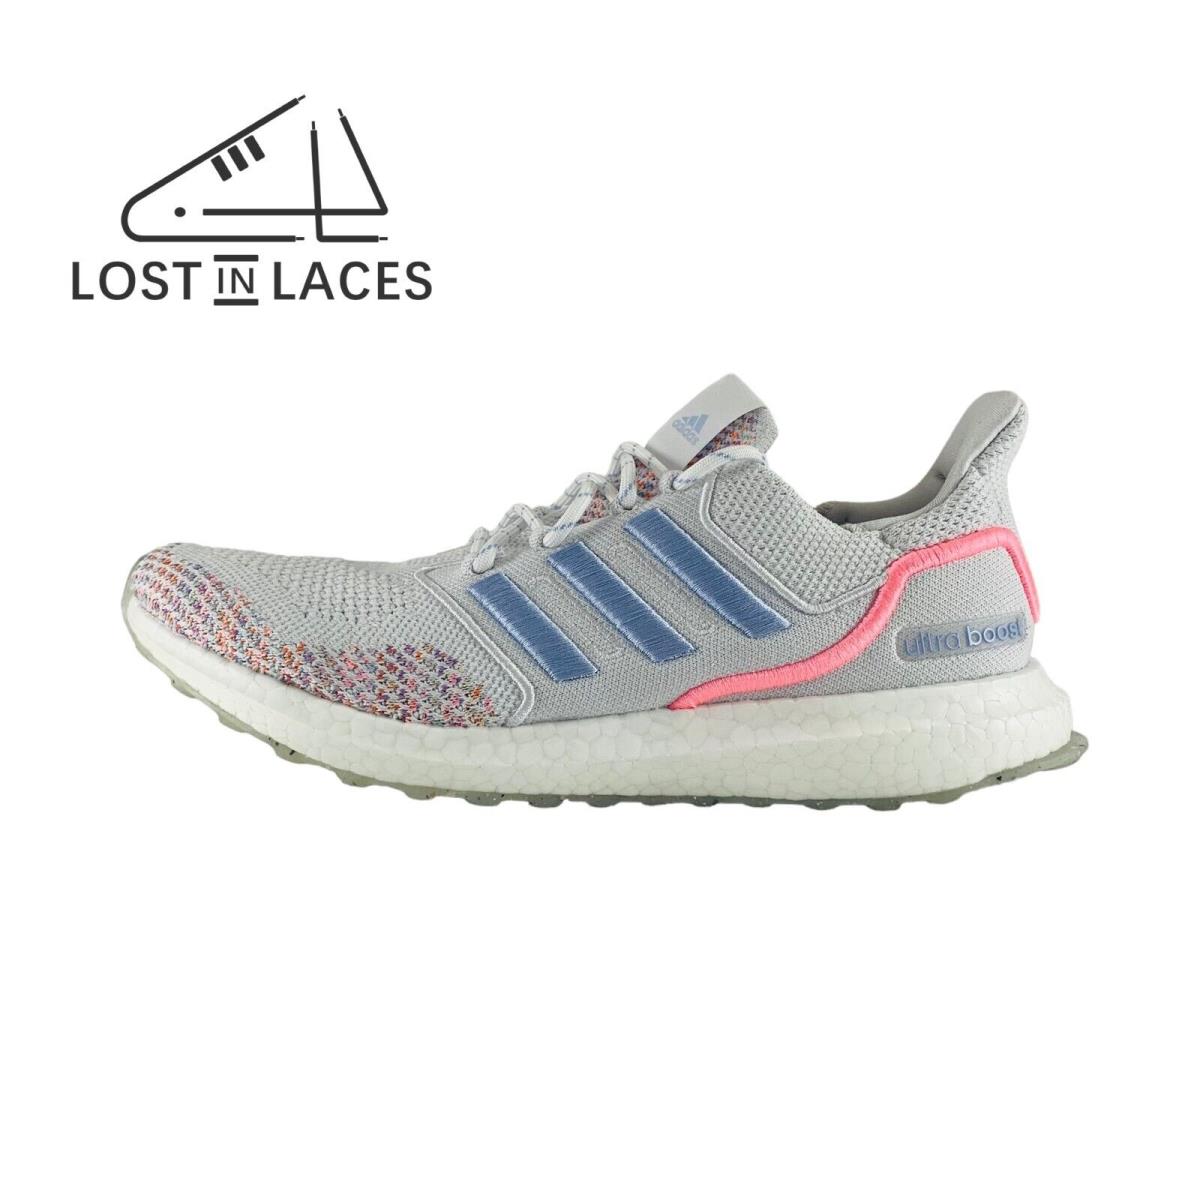 Adidas Ultraboost 1.0 White Blue Dawn Pink Women`s Running Shoes IF5274 - White